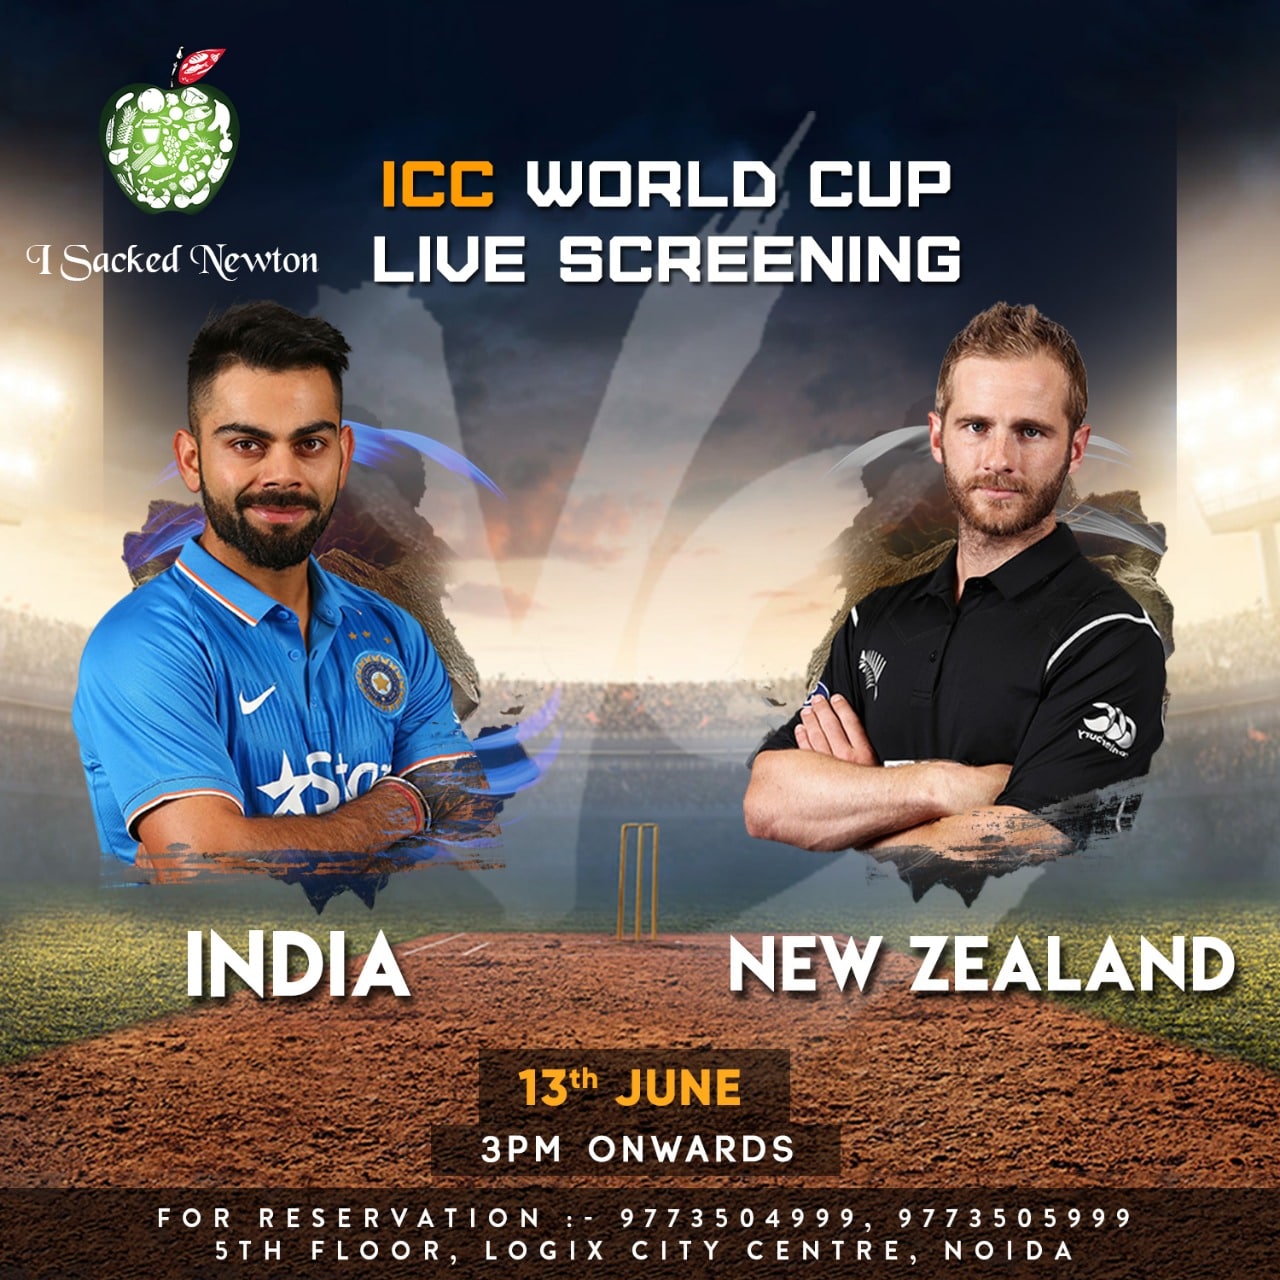 INDIA V/S NEW ZEALAND World Cup Live Sports Screening in Noida